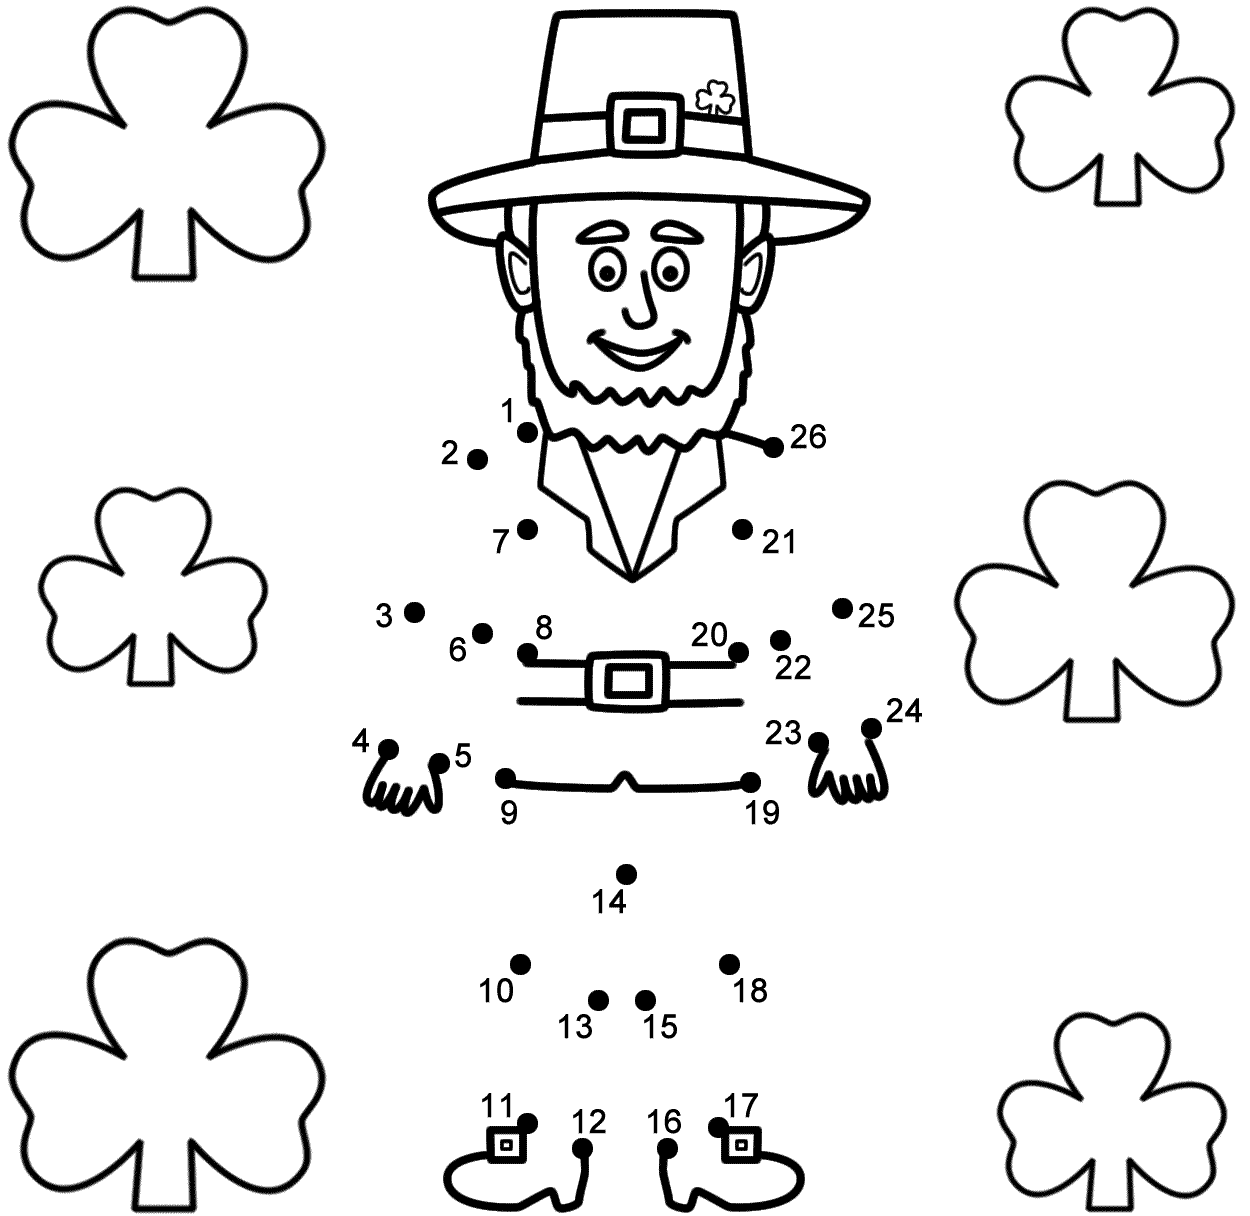 leprechaun-with-shamrocks-connect-the-dots-count-by-1-s-st-patrick